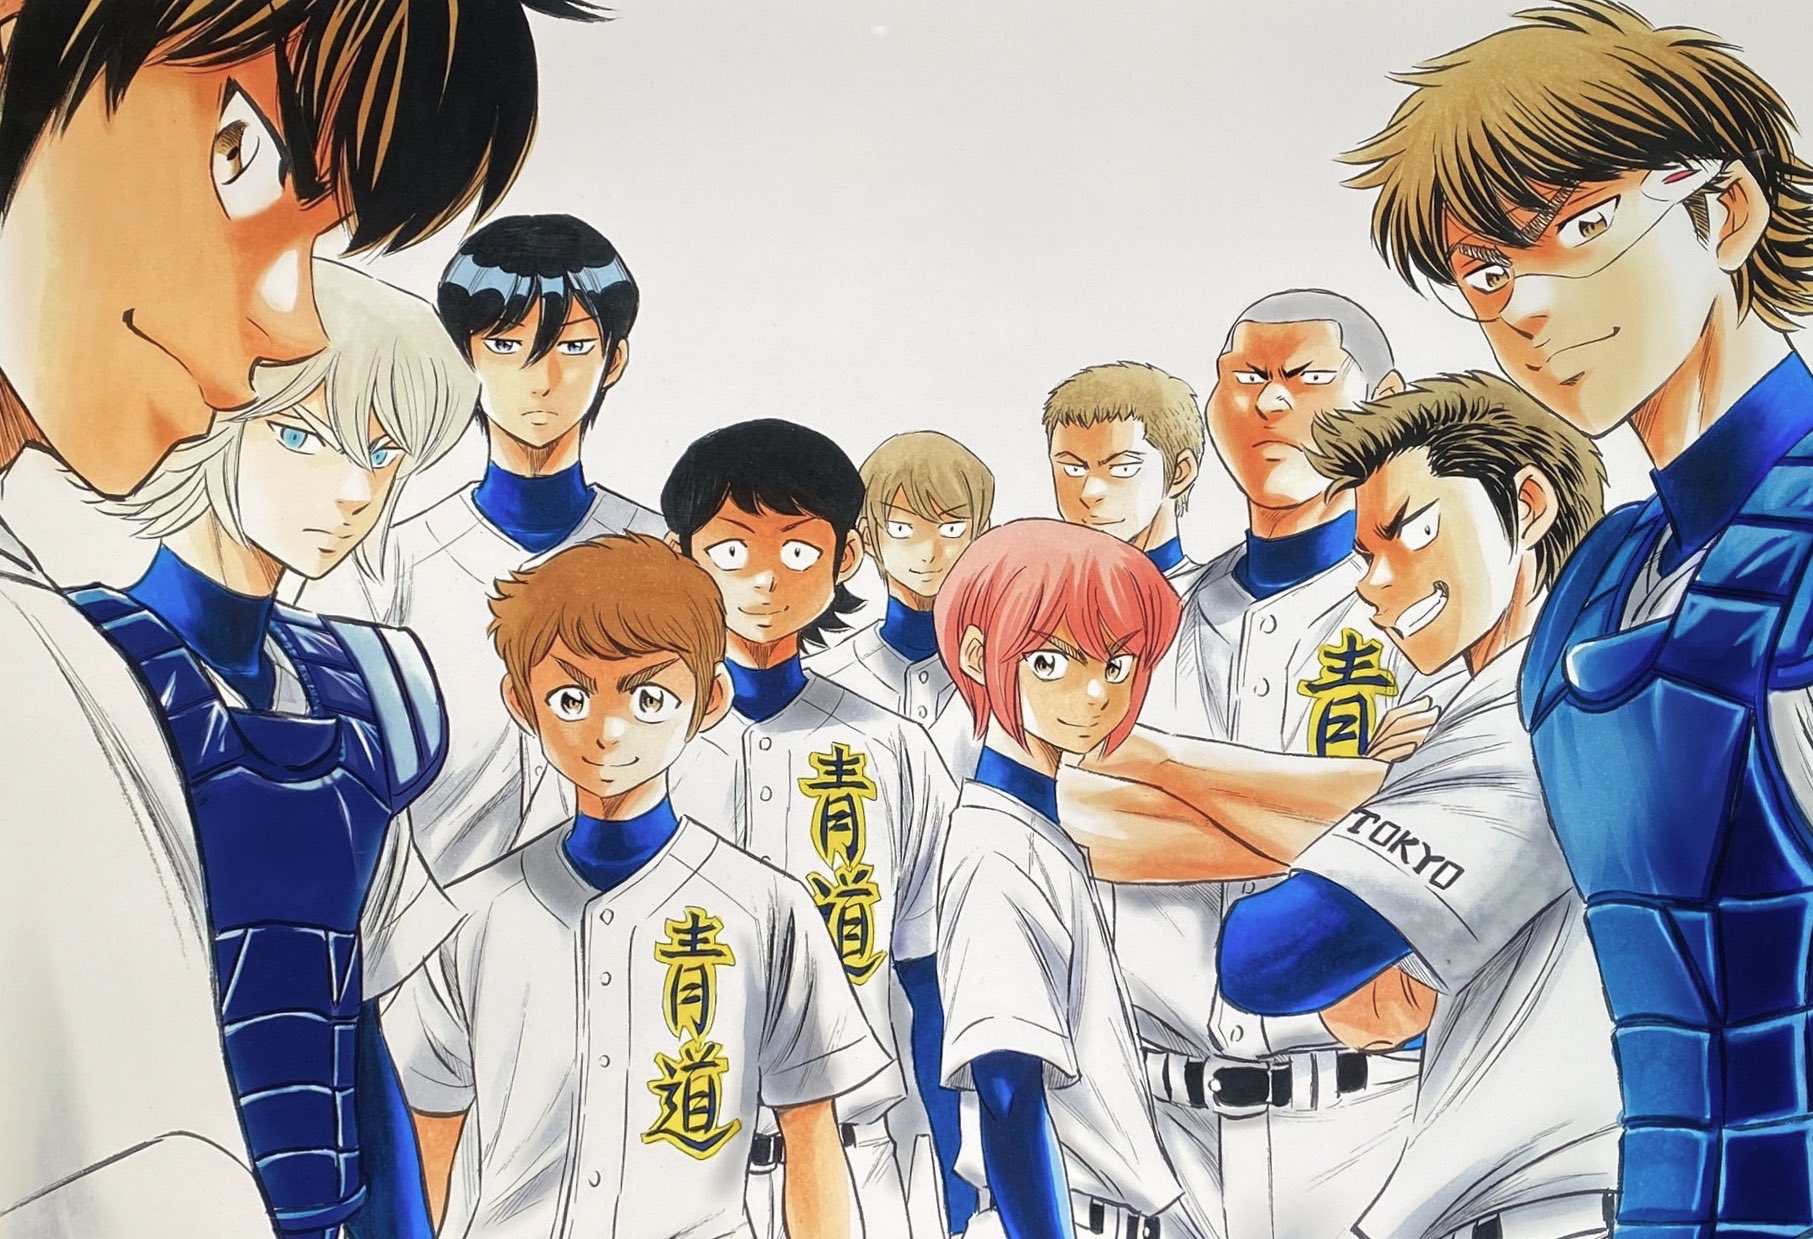 All characters and voice actors in Ace of Diamond 